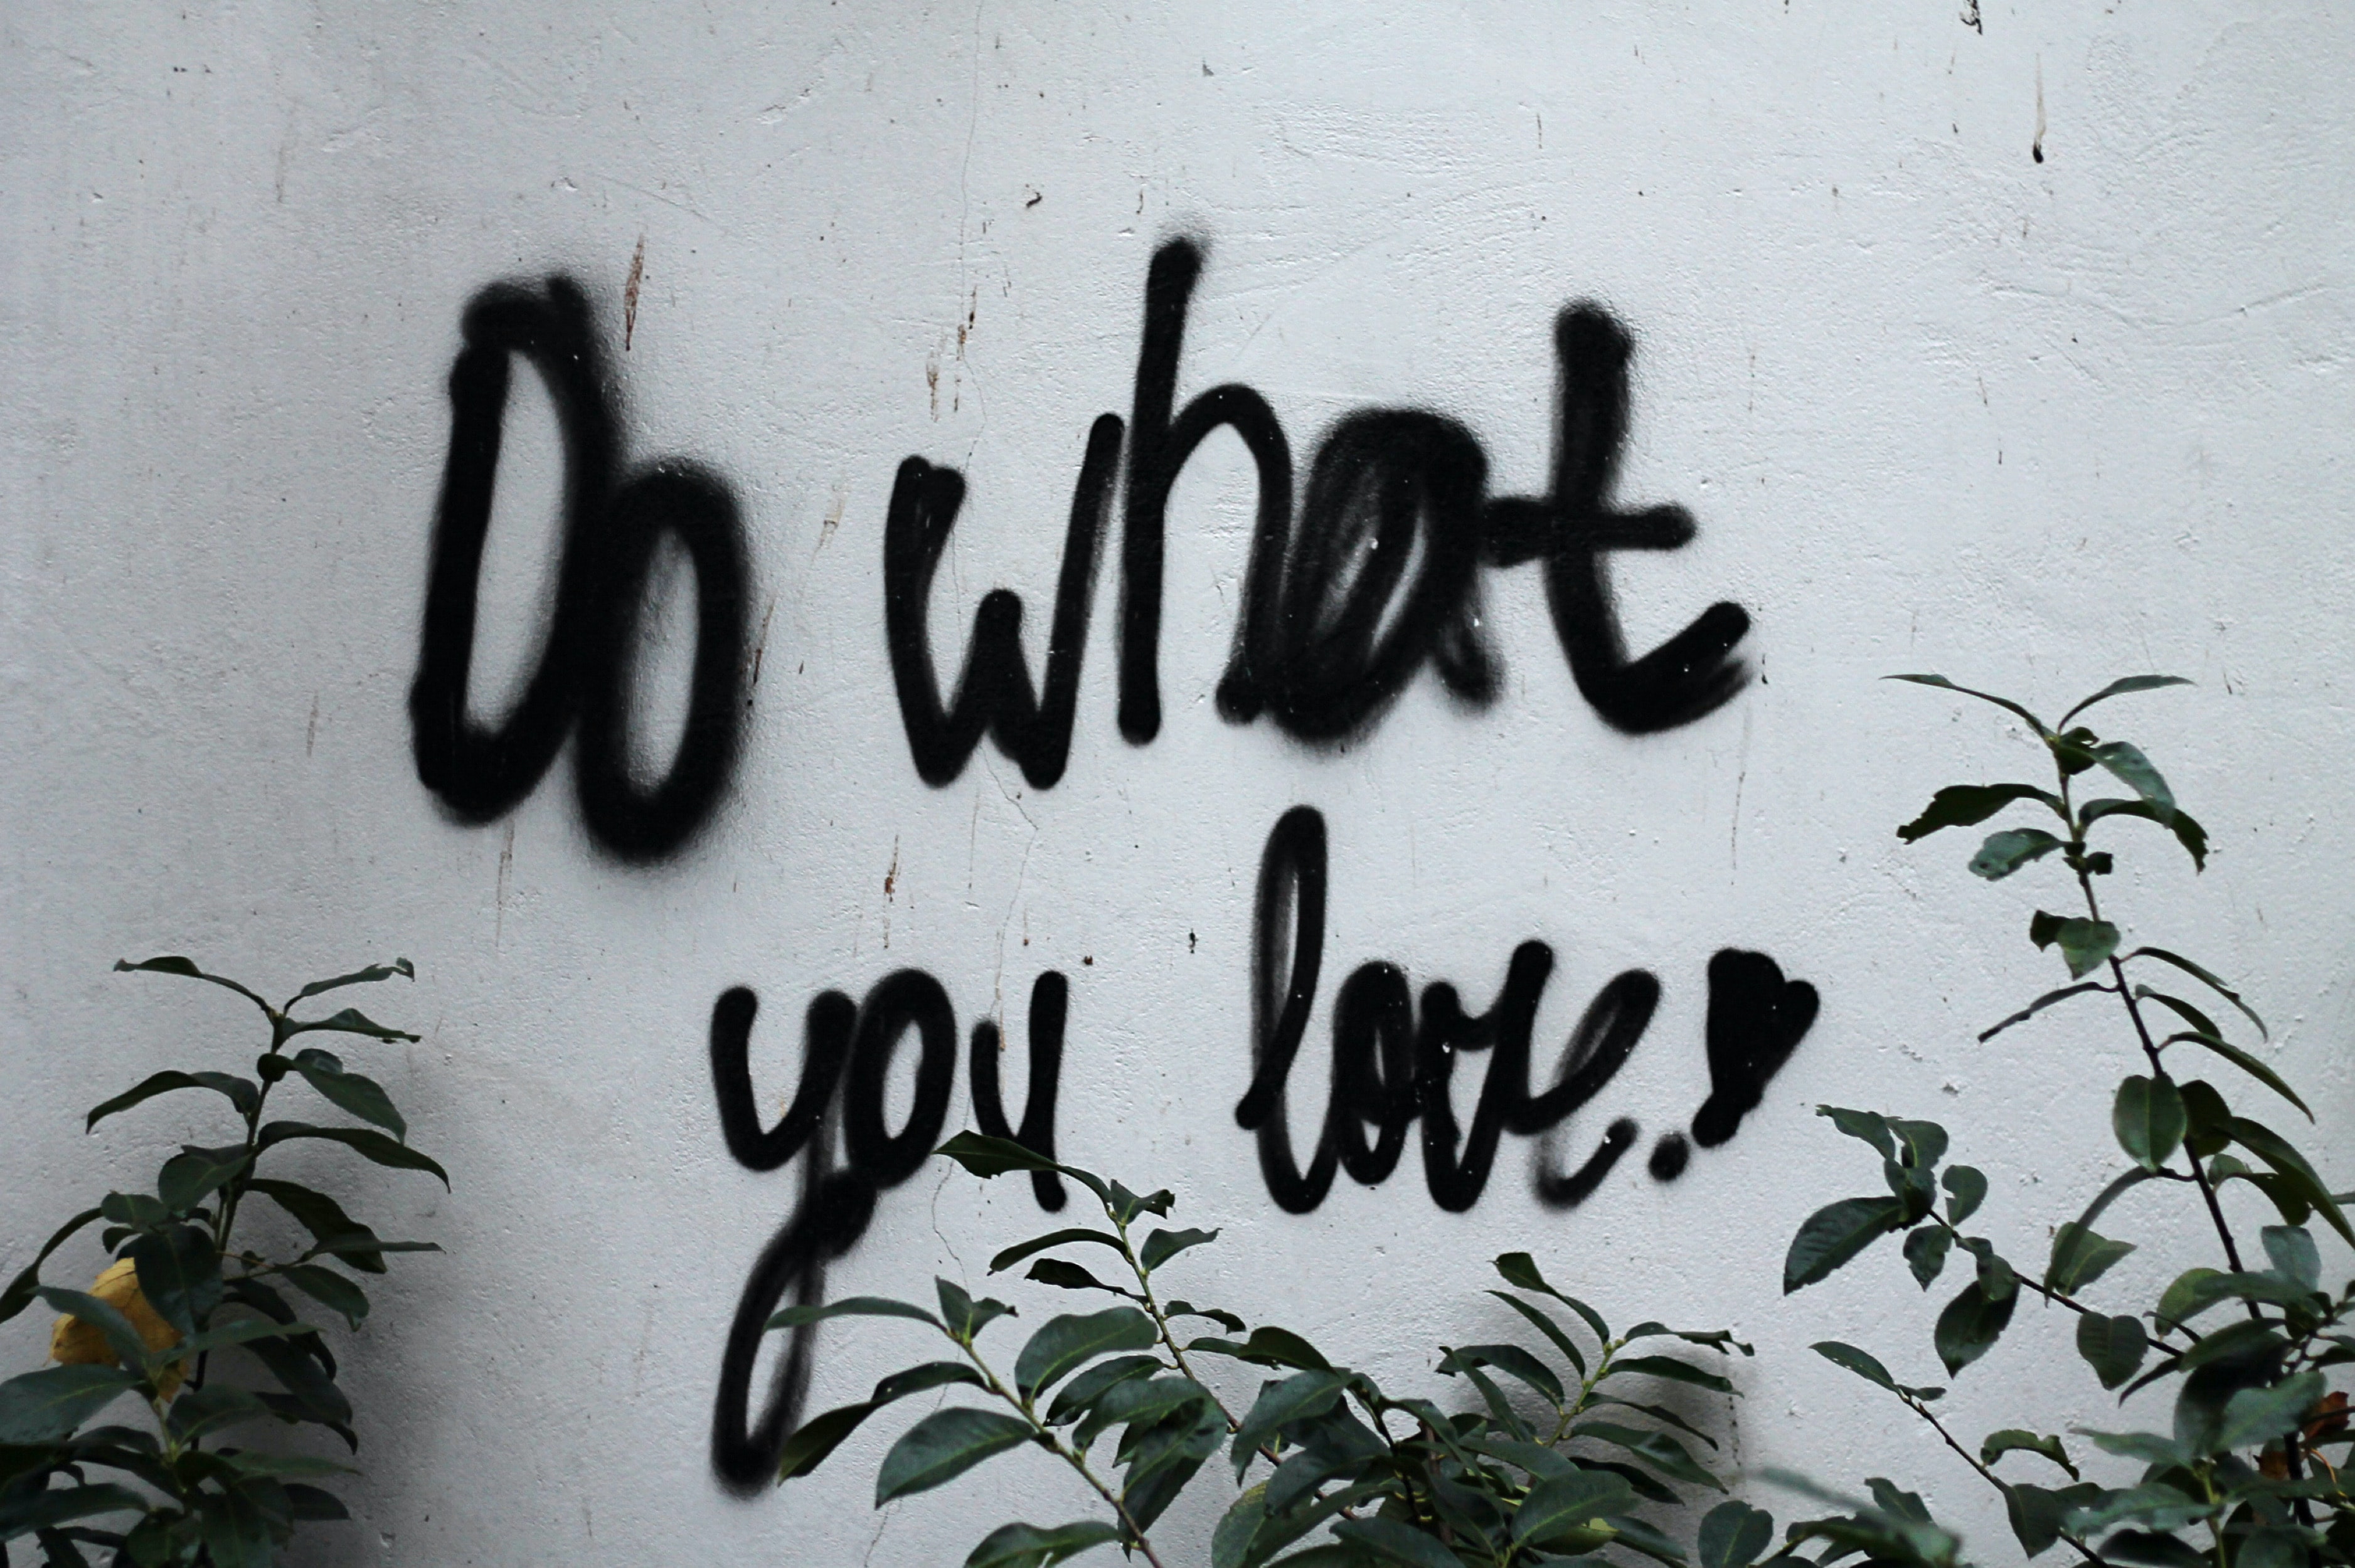 Do what you love!